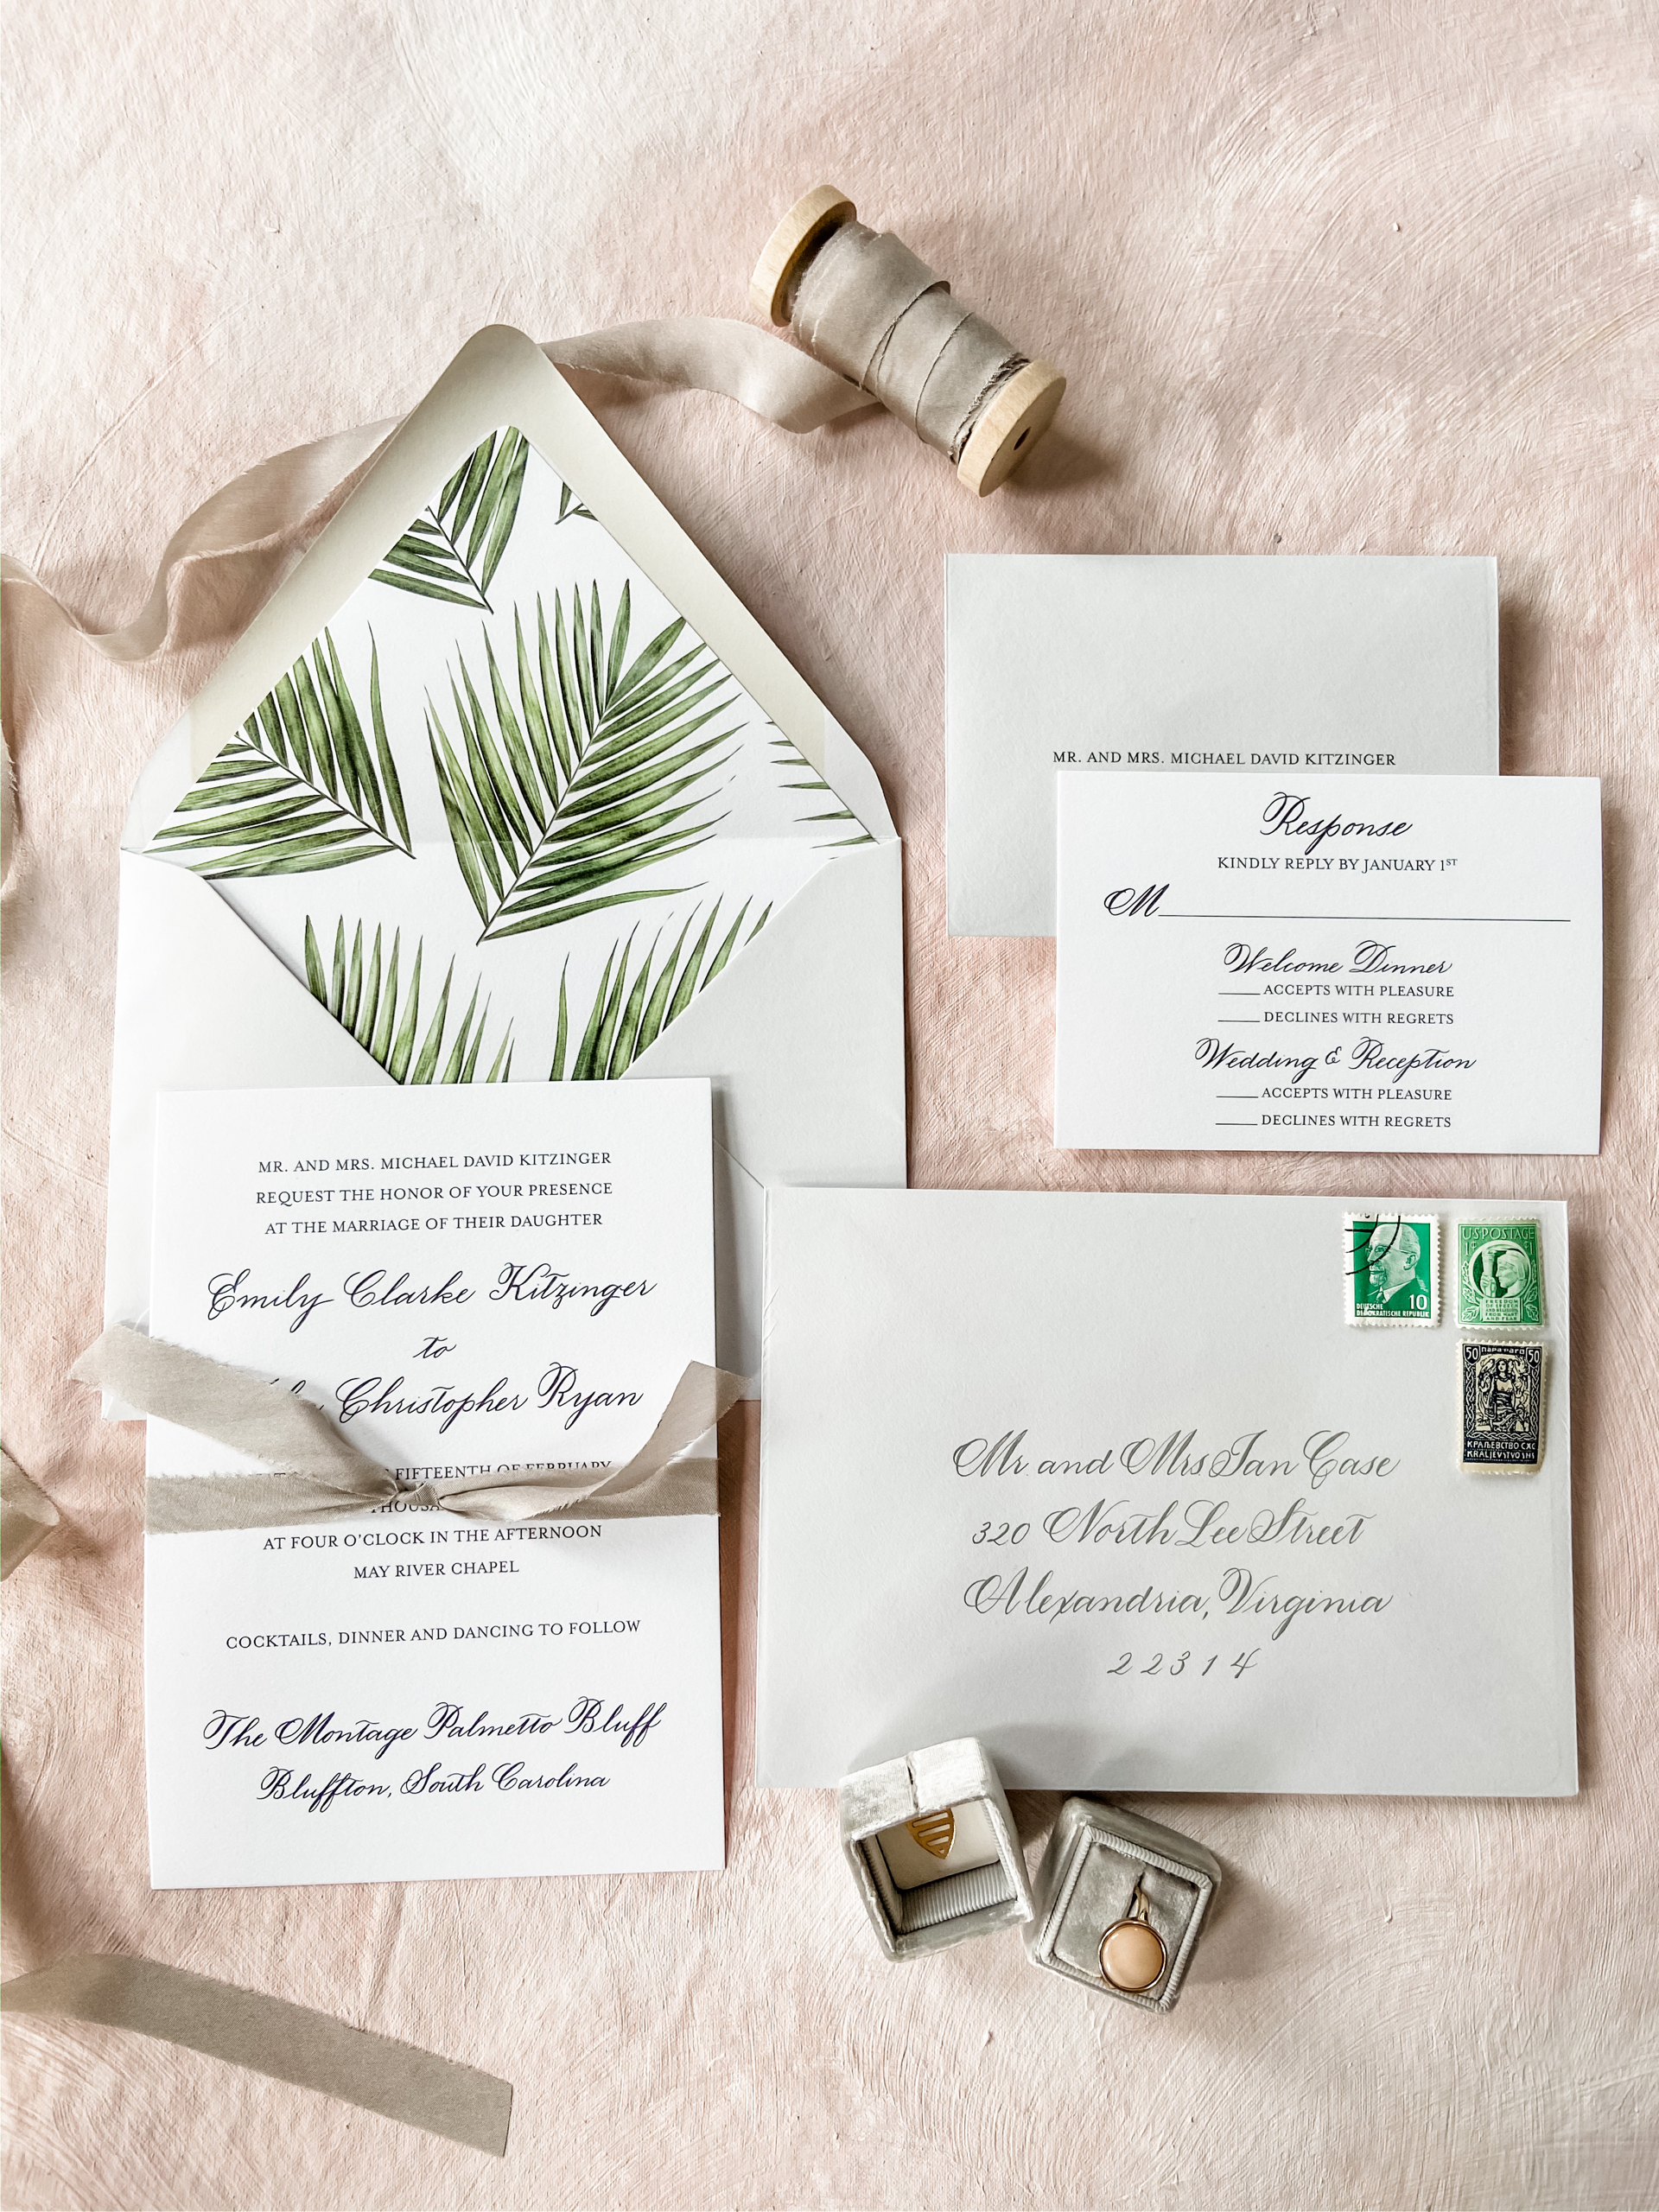 Elegant custom wedding invitation suite with custom hand calligraphy on extra thick card stock with light gray envelopes with hand painted water color palm leaf envelop liners by Laura Hooper Design House.